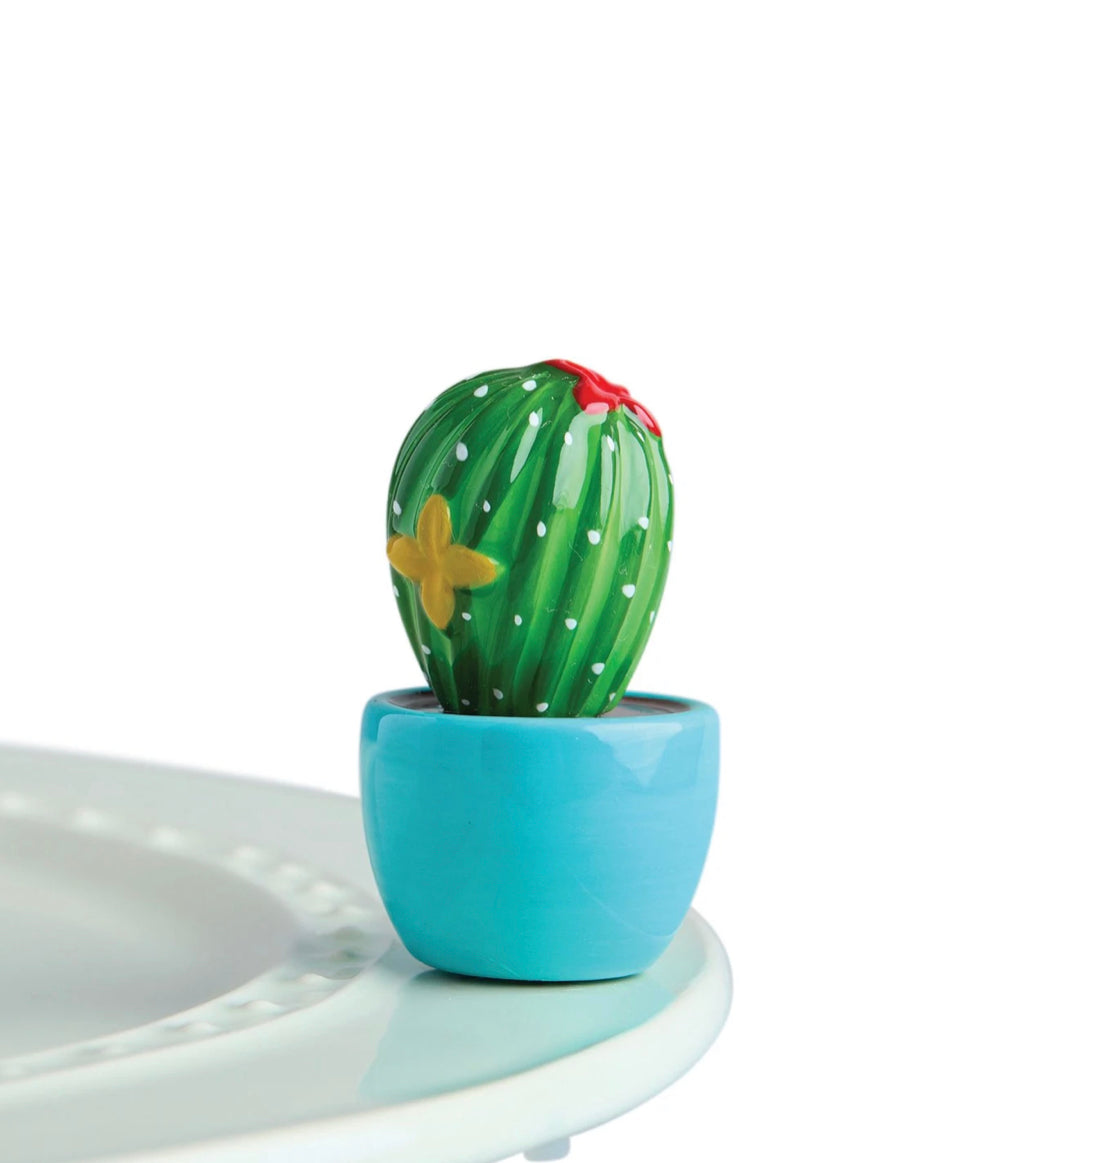 A266 Nora Fleming "Can't Touch This" Mini- Cactus